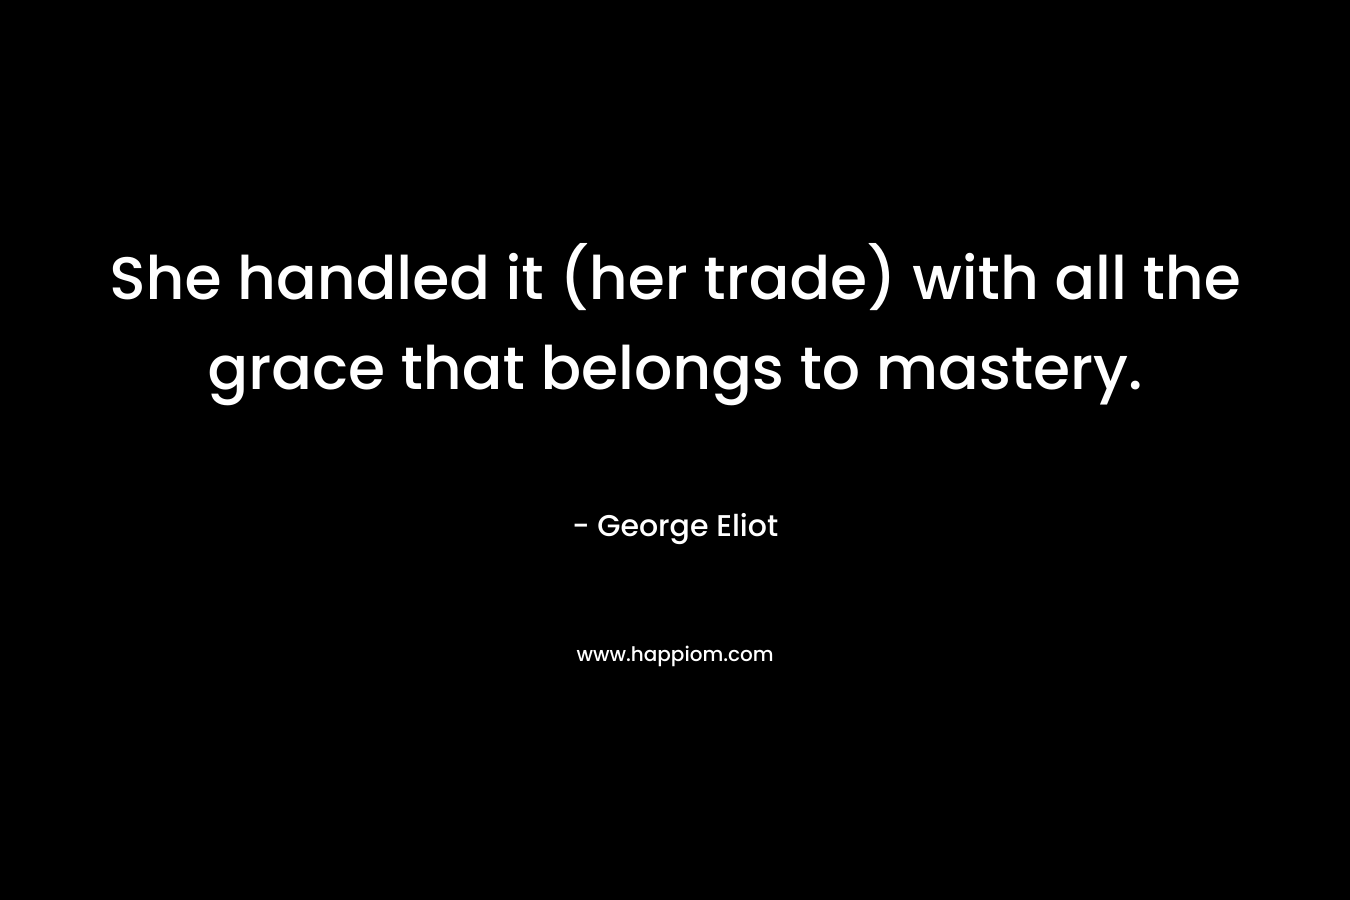 She handled it (her trade) with all the grace that belongs to mastery. – George Eliot